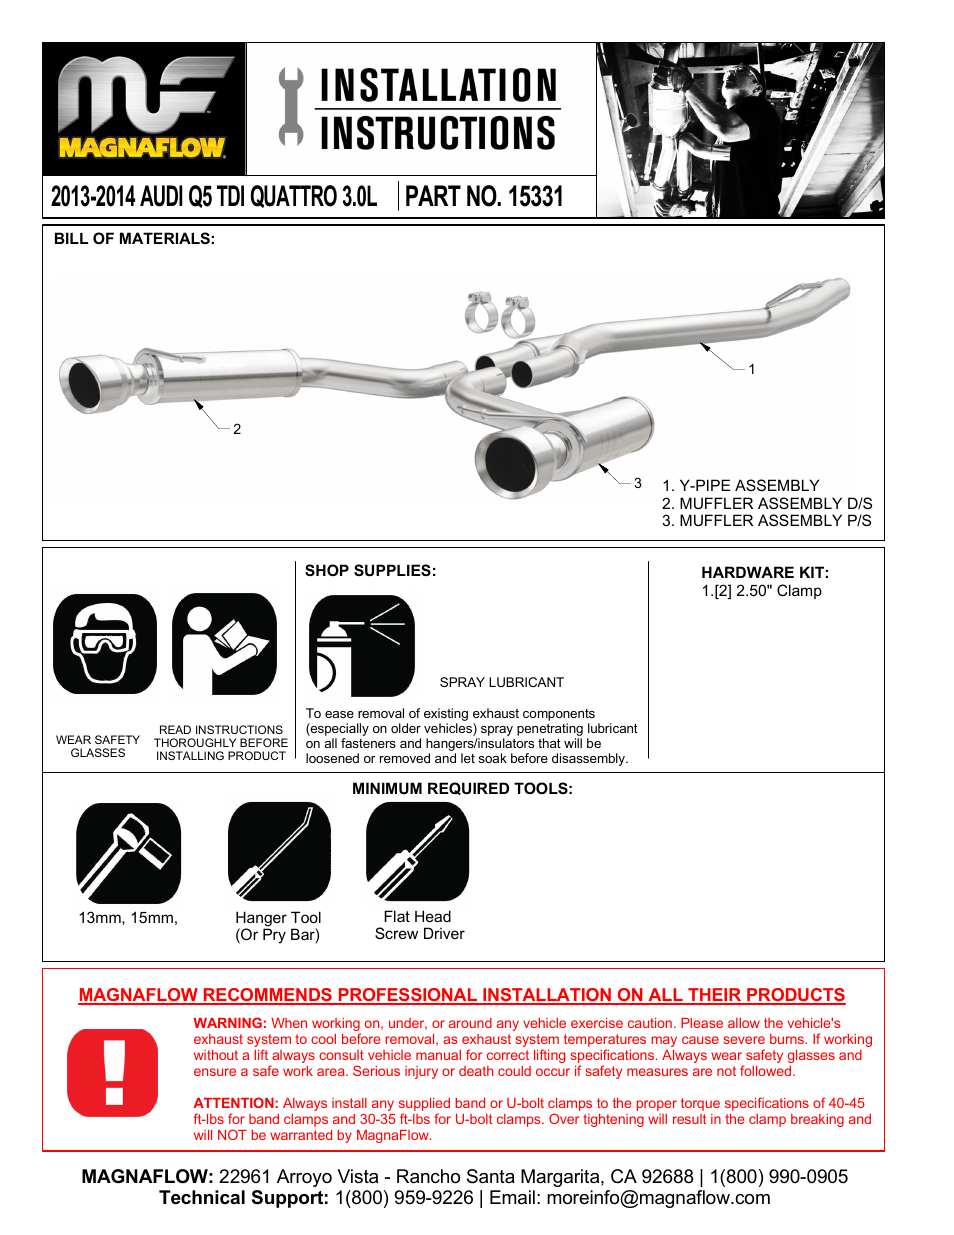 AUDI TRUCK Q5 Stainless Cat-Back System PERFORMANCE EXHAUST